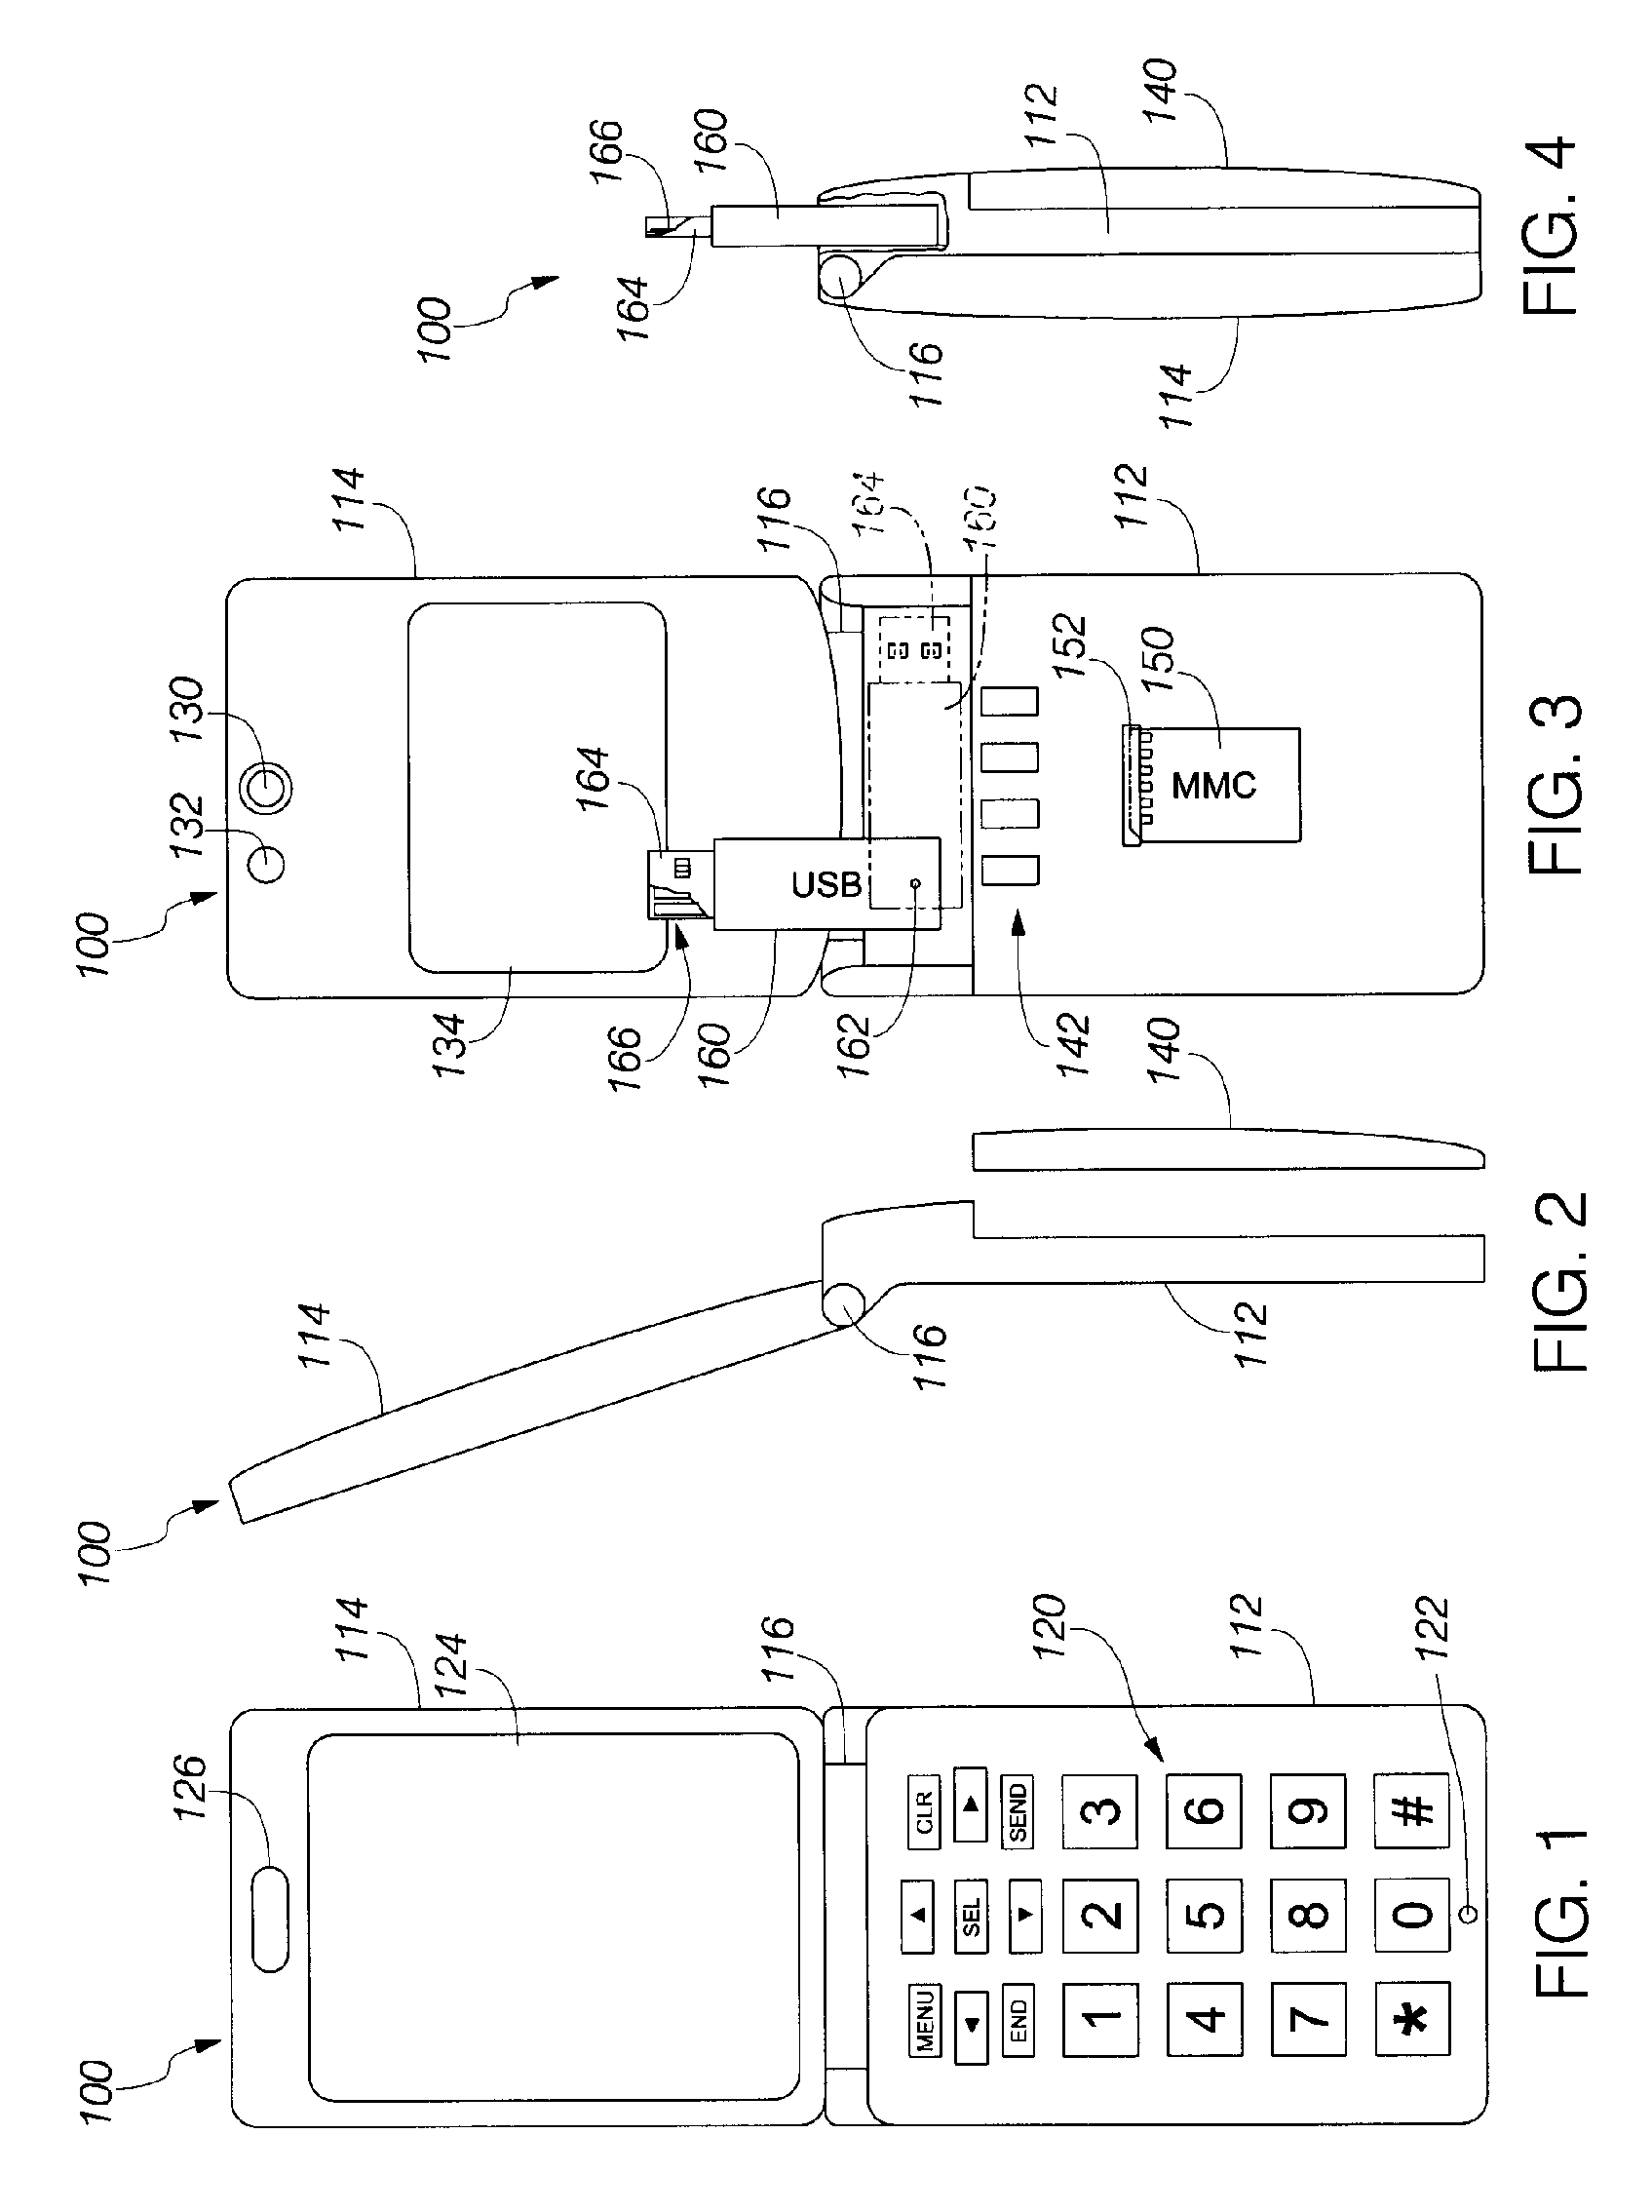 Cellular telephone with integrated USB port engagement device that provides access to multimedia card as a solid-state device